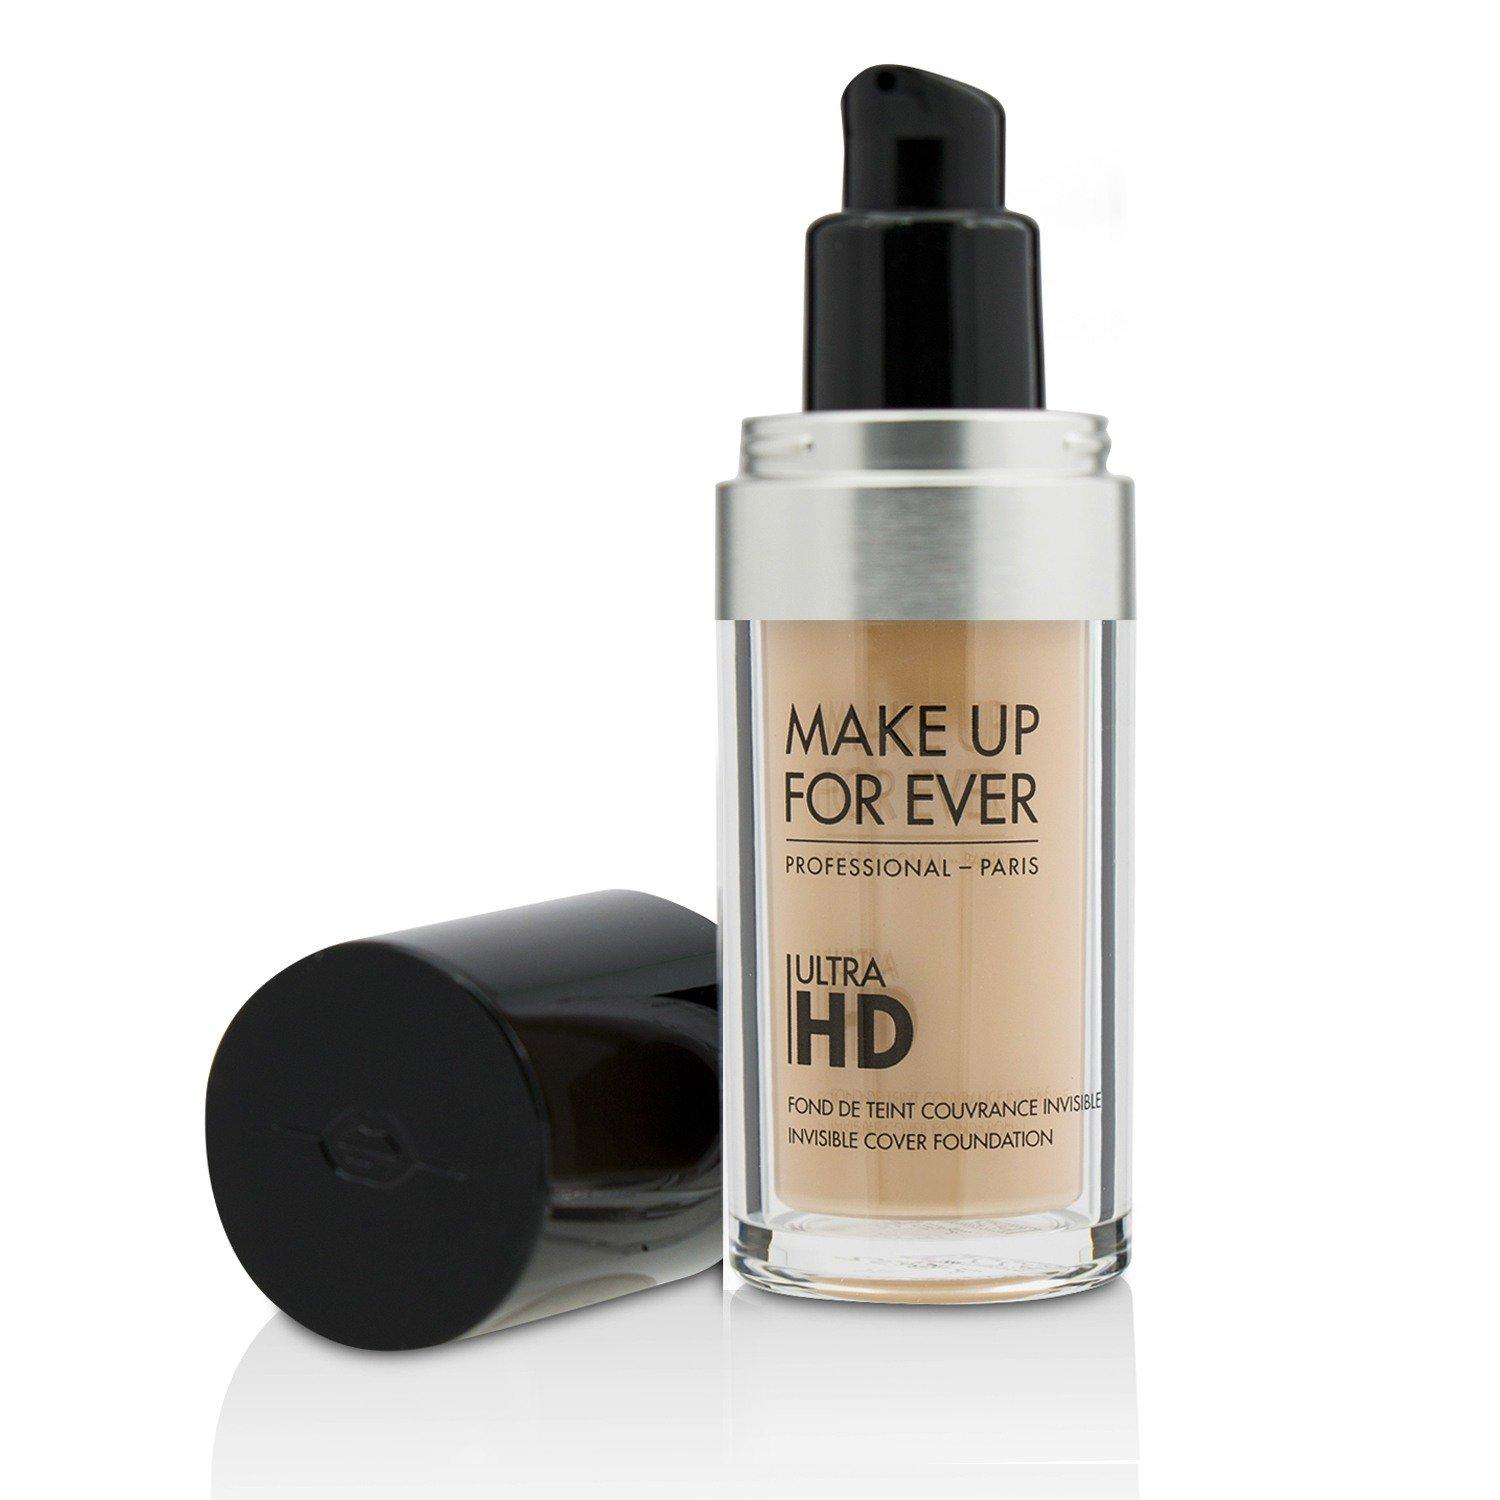 Make Up For Ever Ultra HD Invisible Cover Foundation, R220 - 1.01 oz bottle